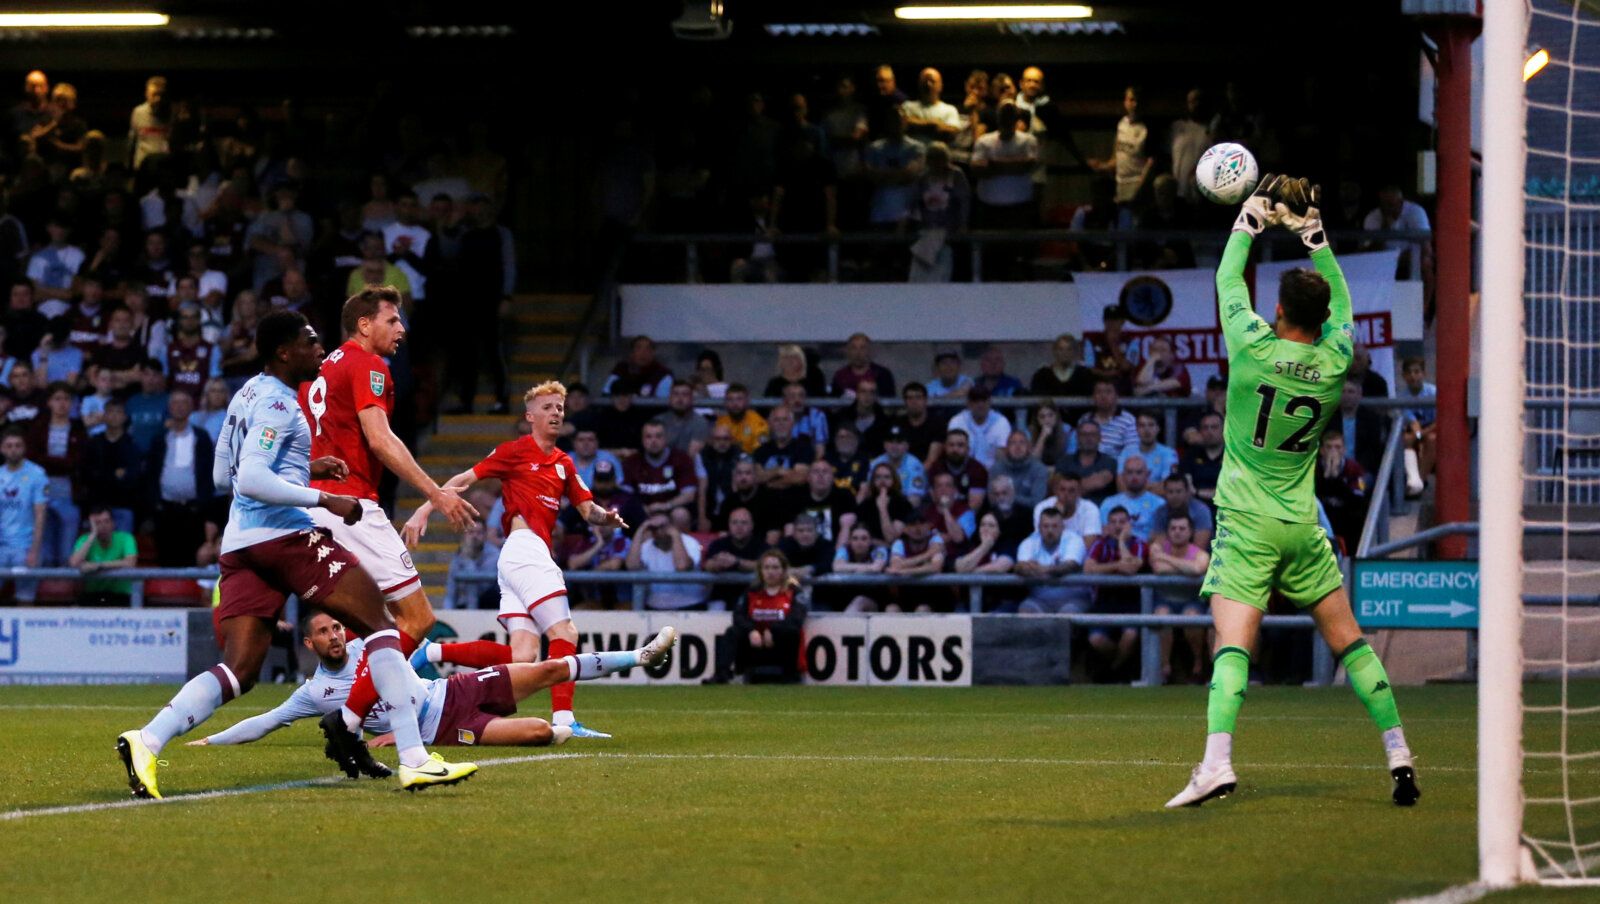 Soccer Football - Carabao Cup Second Round - Crewe Alexandra v Aston Villa - The Alexandra Stadium, Crewe, Britain - August 27, 2019  Aston Villa's Jed Steer saves a shot from Crewe Alexandra's Charlie Kirk     Action Images via Reuters/Ed Sykes  EDITORIAL USE ONLY. No use with unauthorized audio, video, data, fixture lists, club/league logos or "live" services. Online in-match use limited to 75 images, no video emulation. No use in betting, games or single club/league/player publications.  Plea